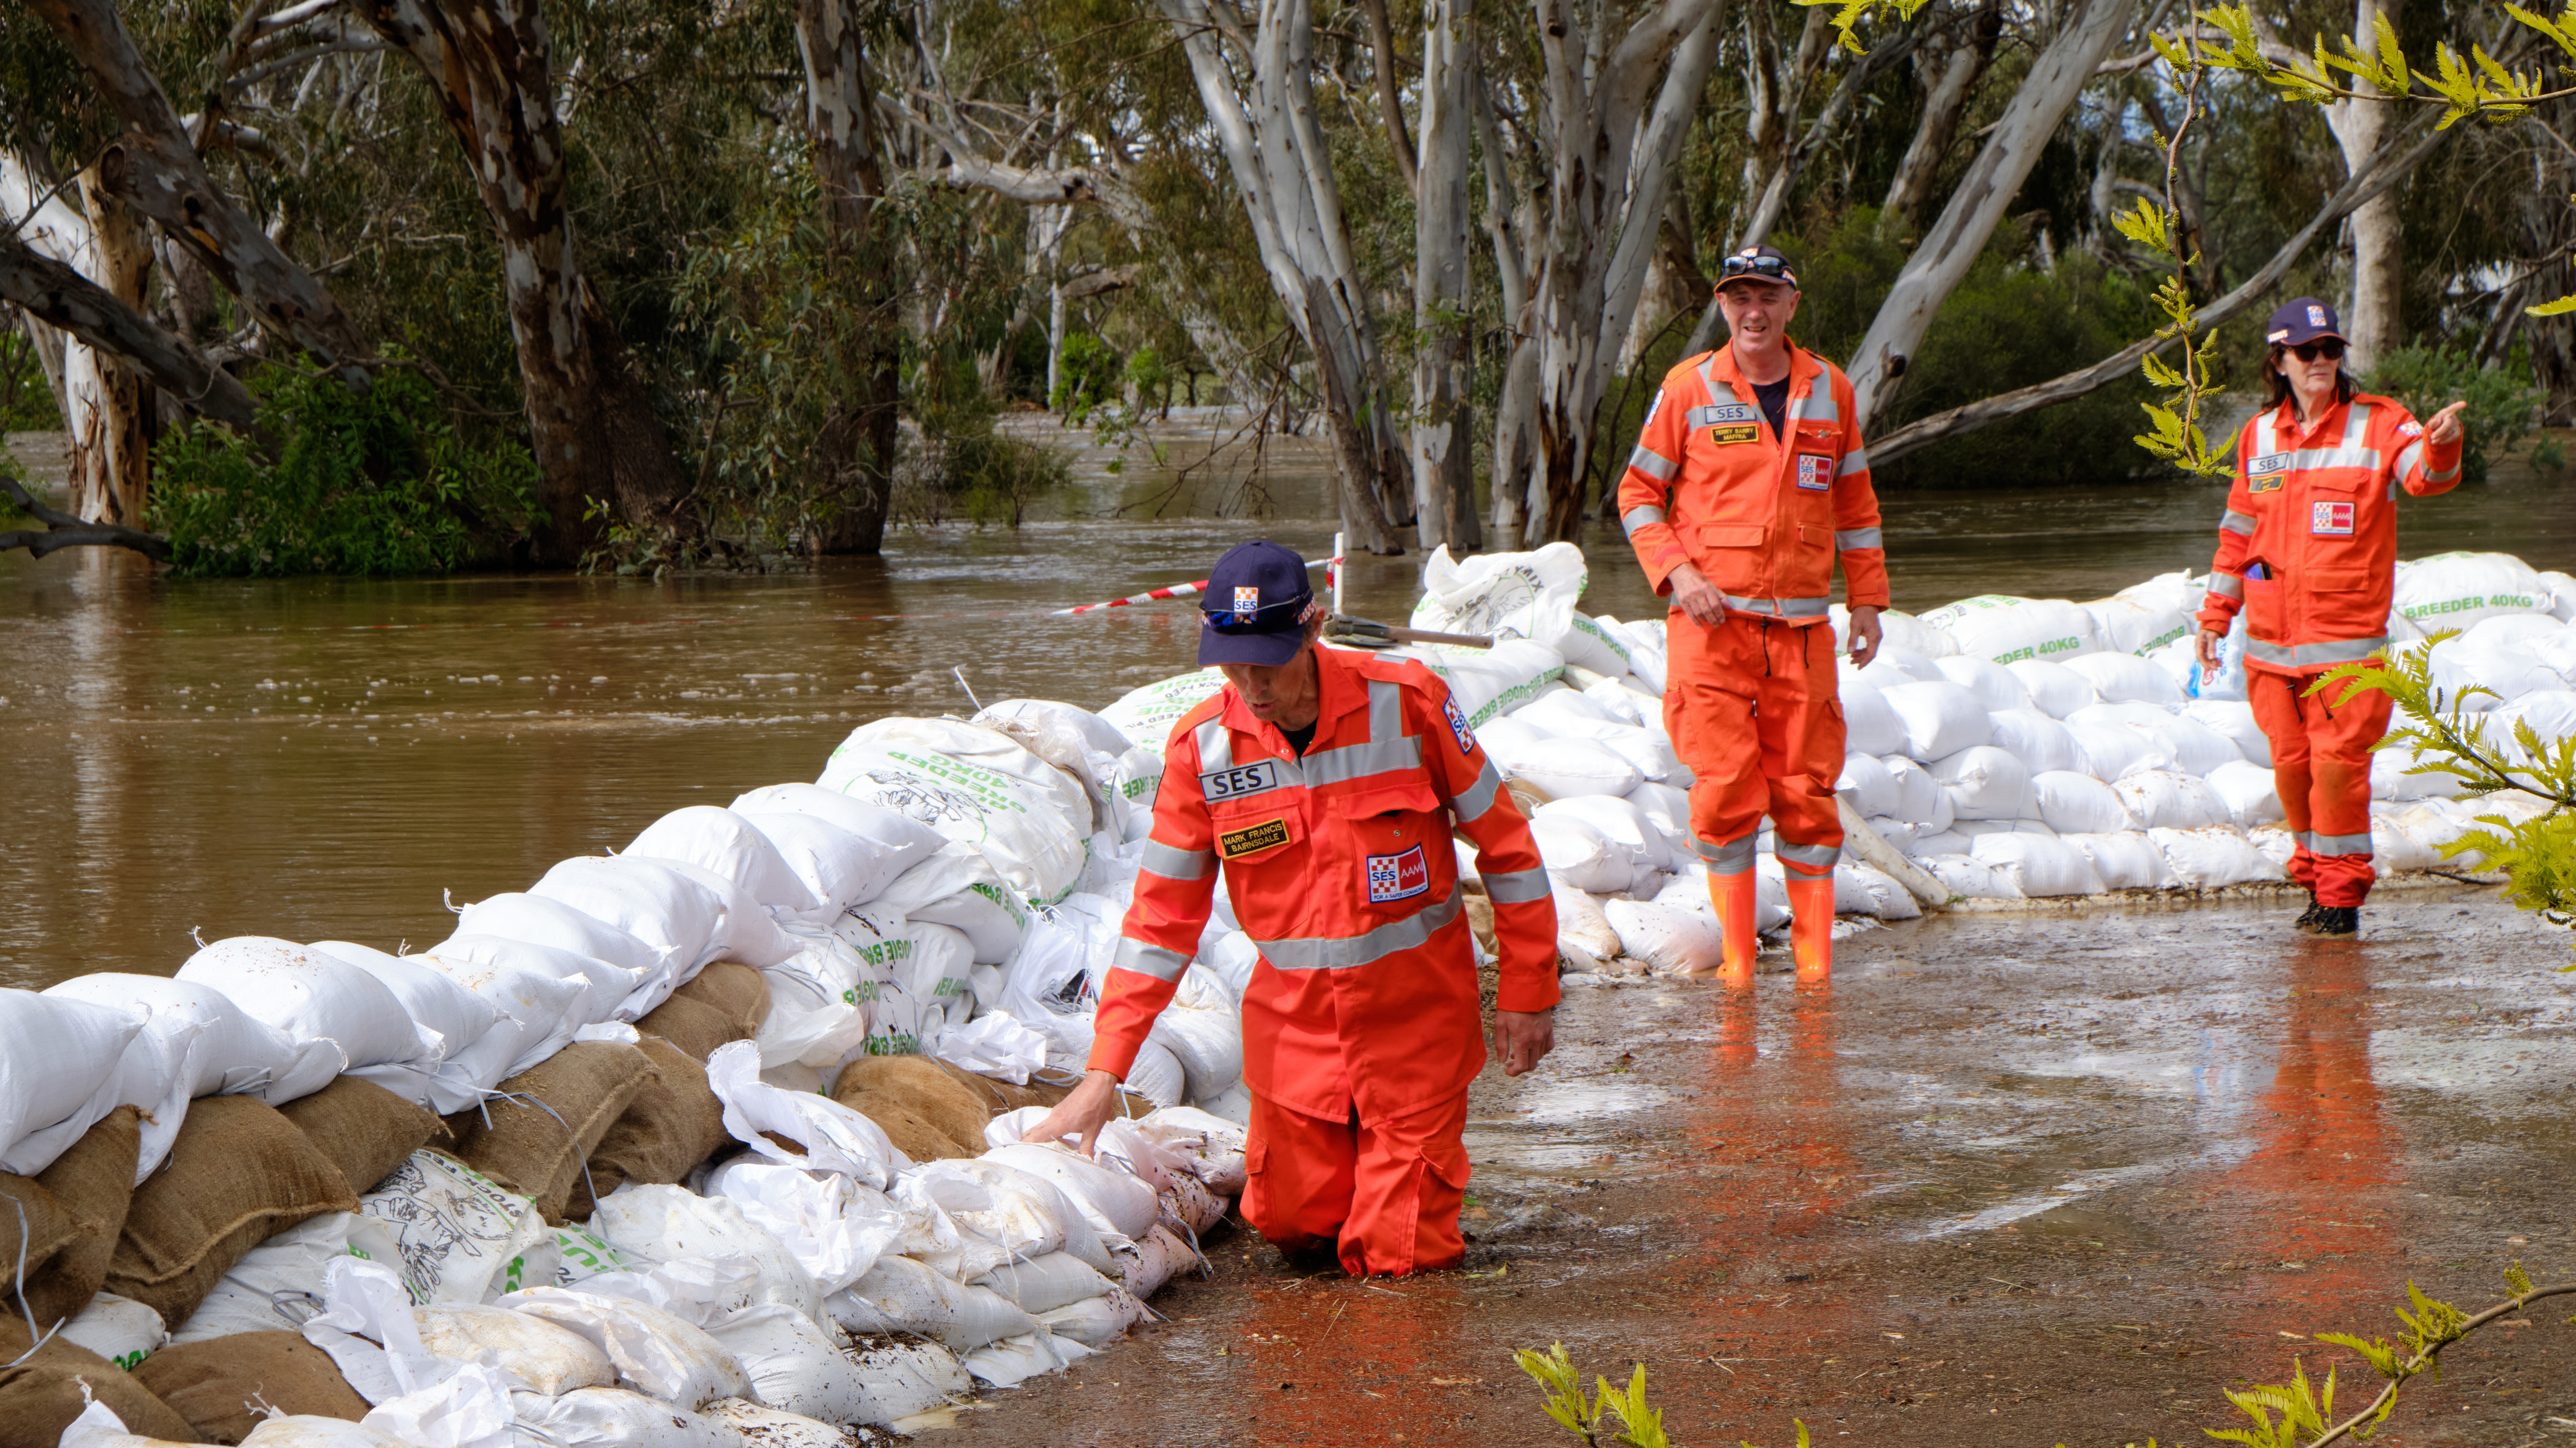 CFA, Army, and Airforce working together Sand baging along Campaspie Esp. In Echuca West